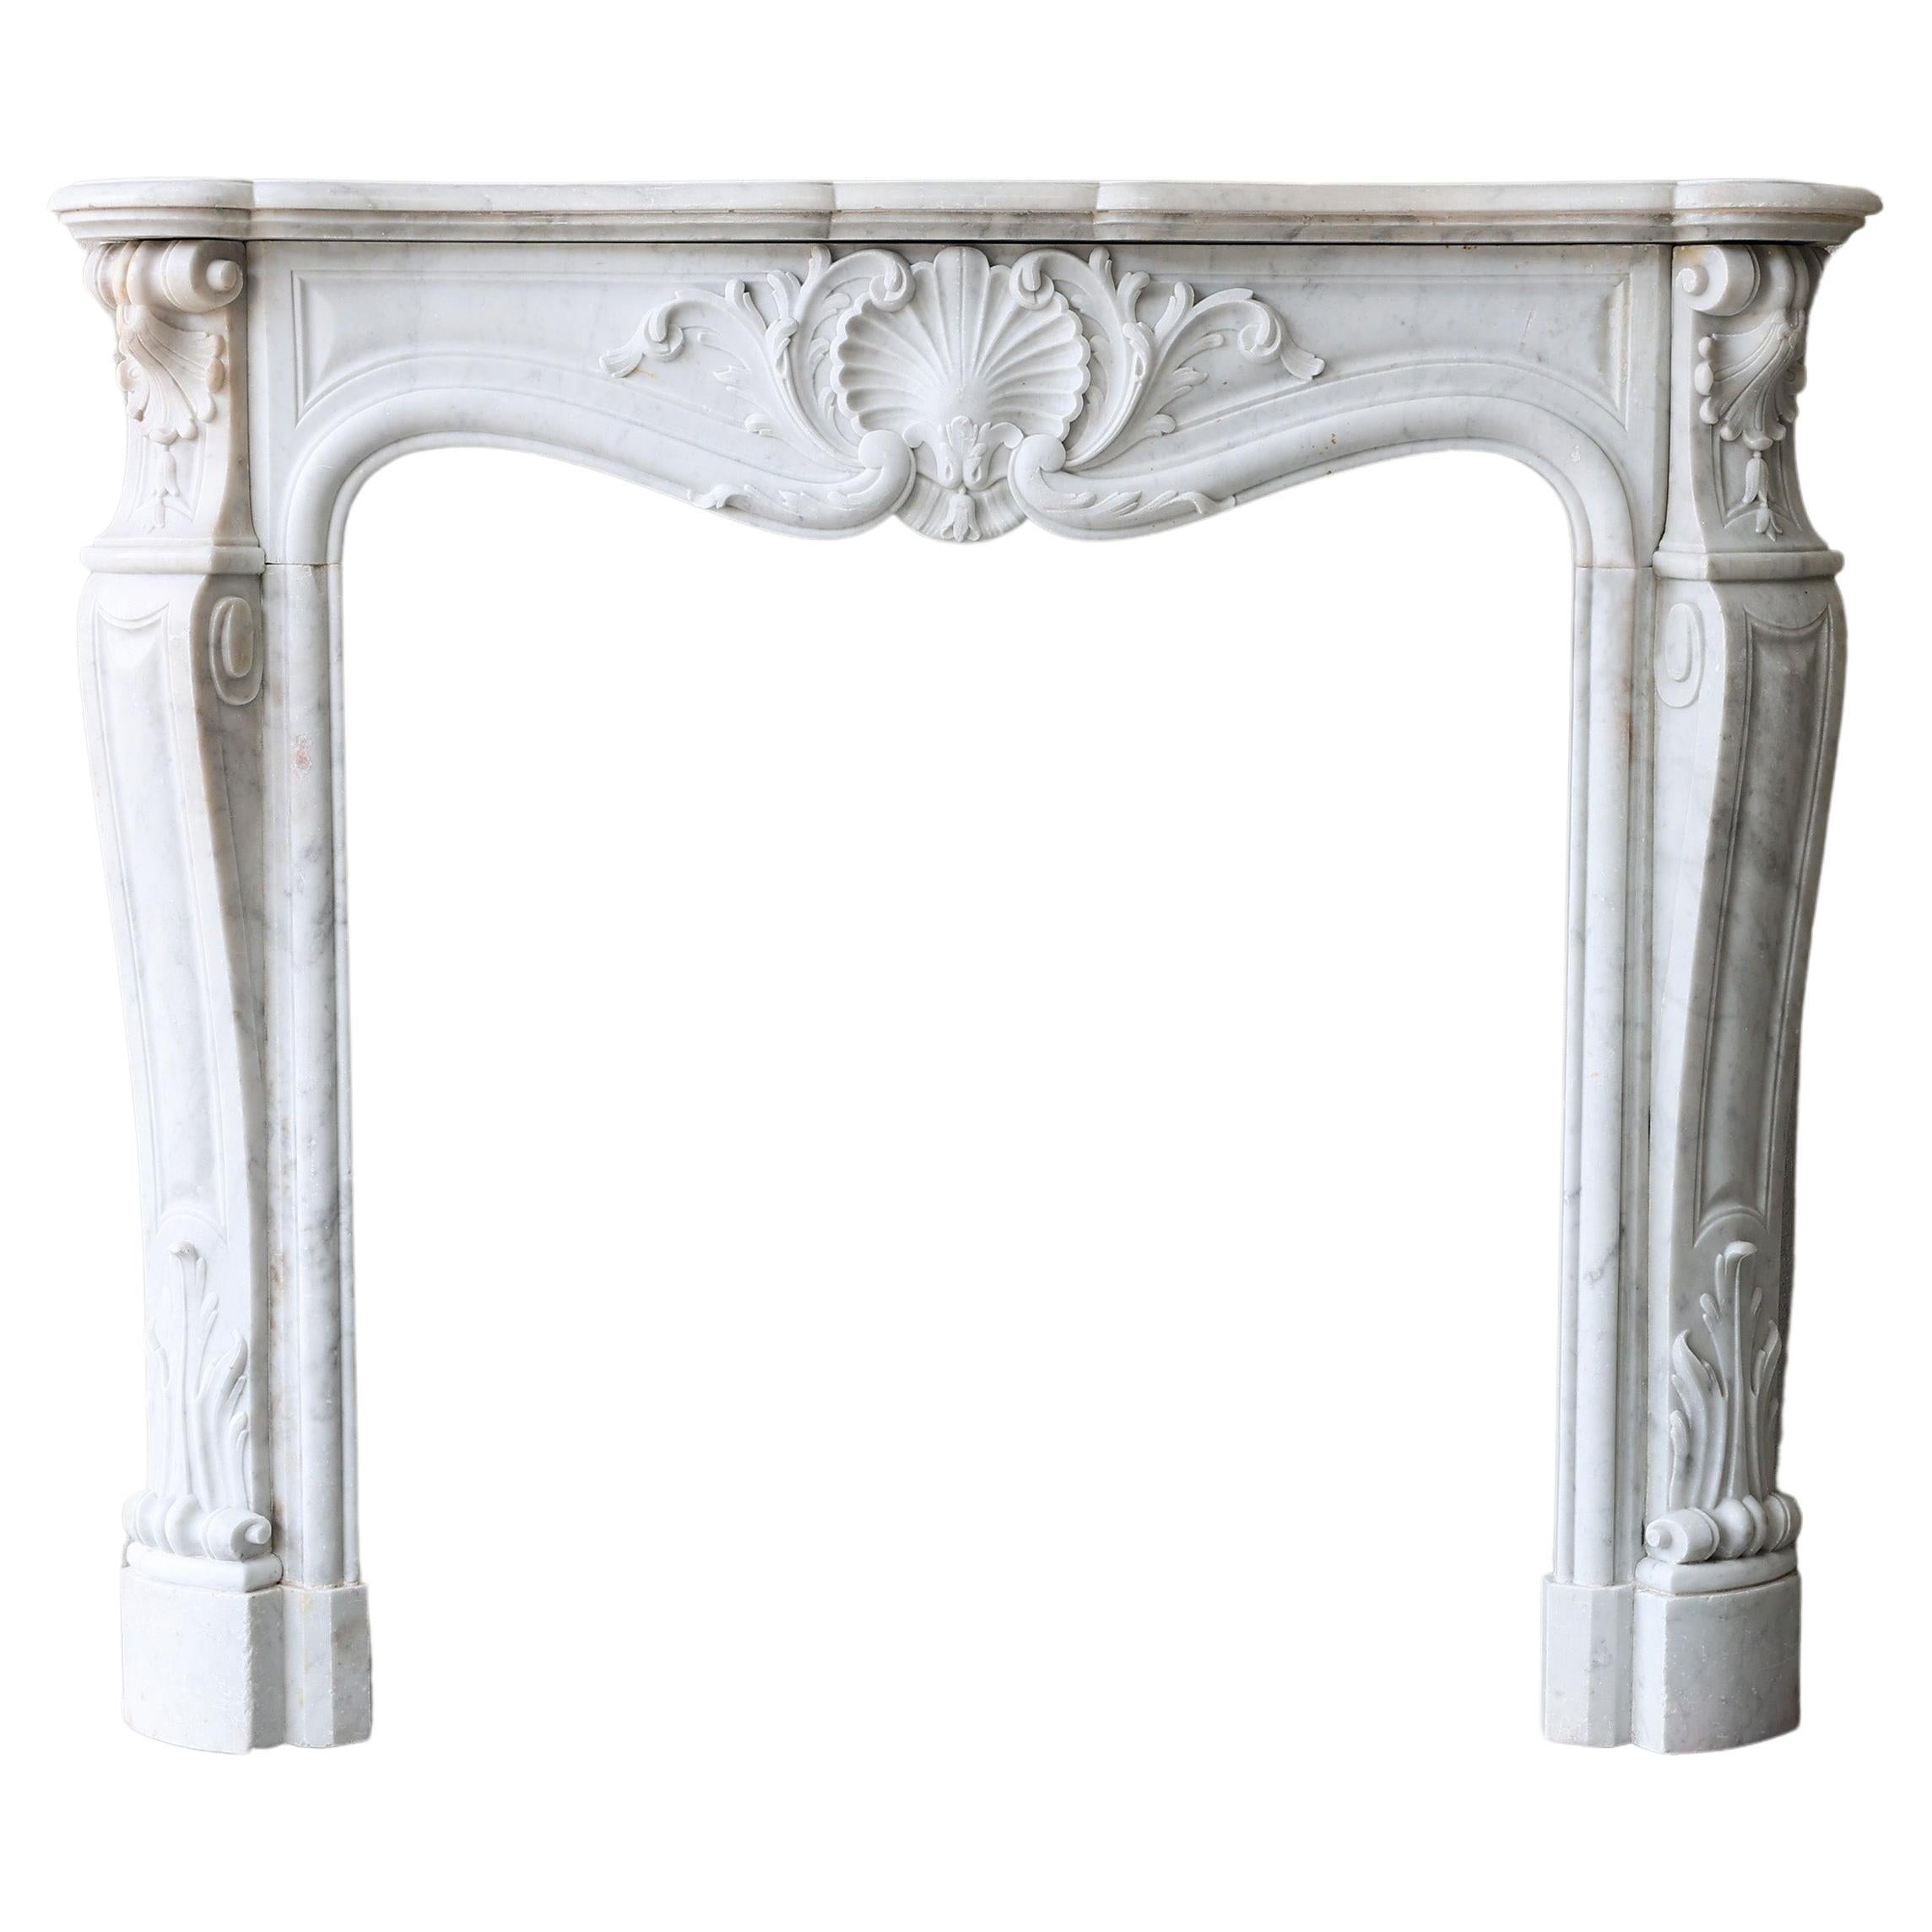 Antique Marble Fireplace  Carrara Marble  19th Century